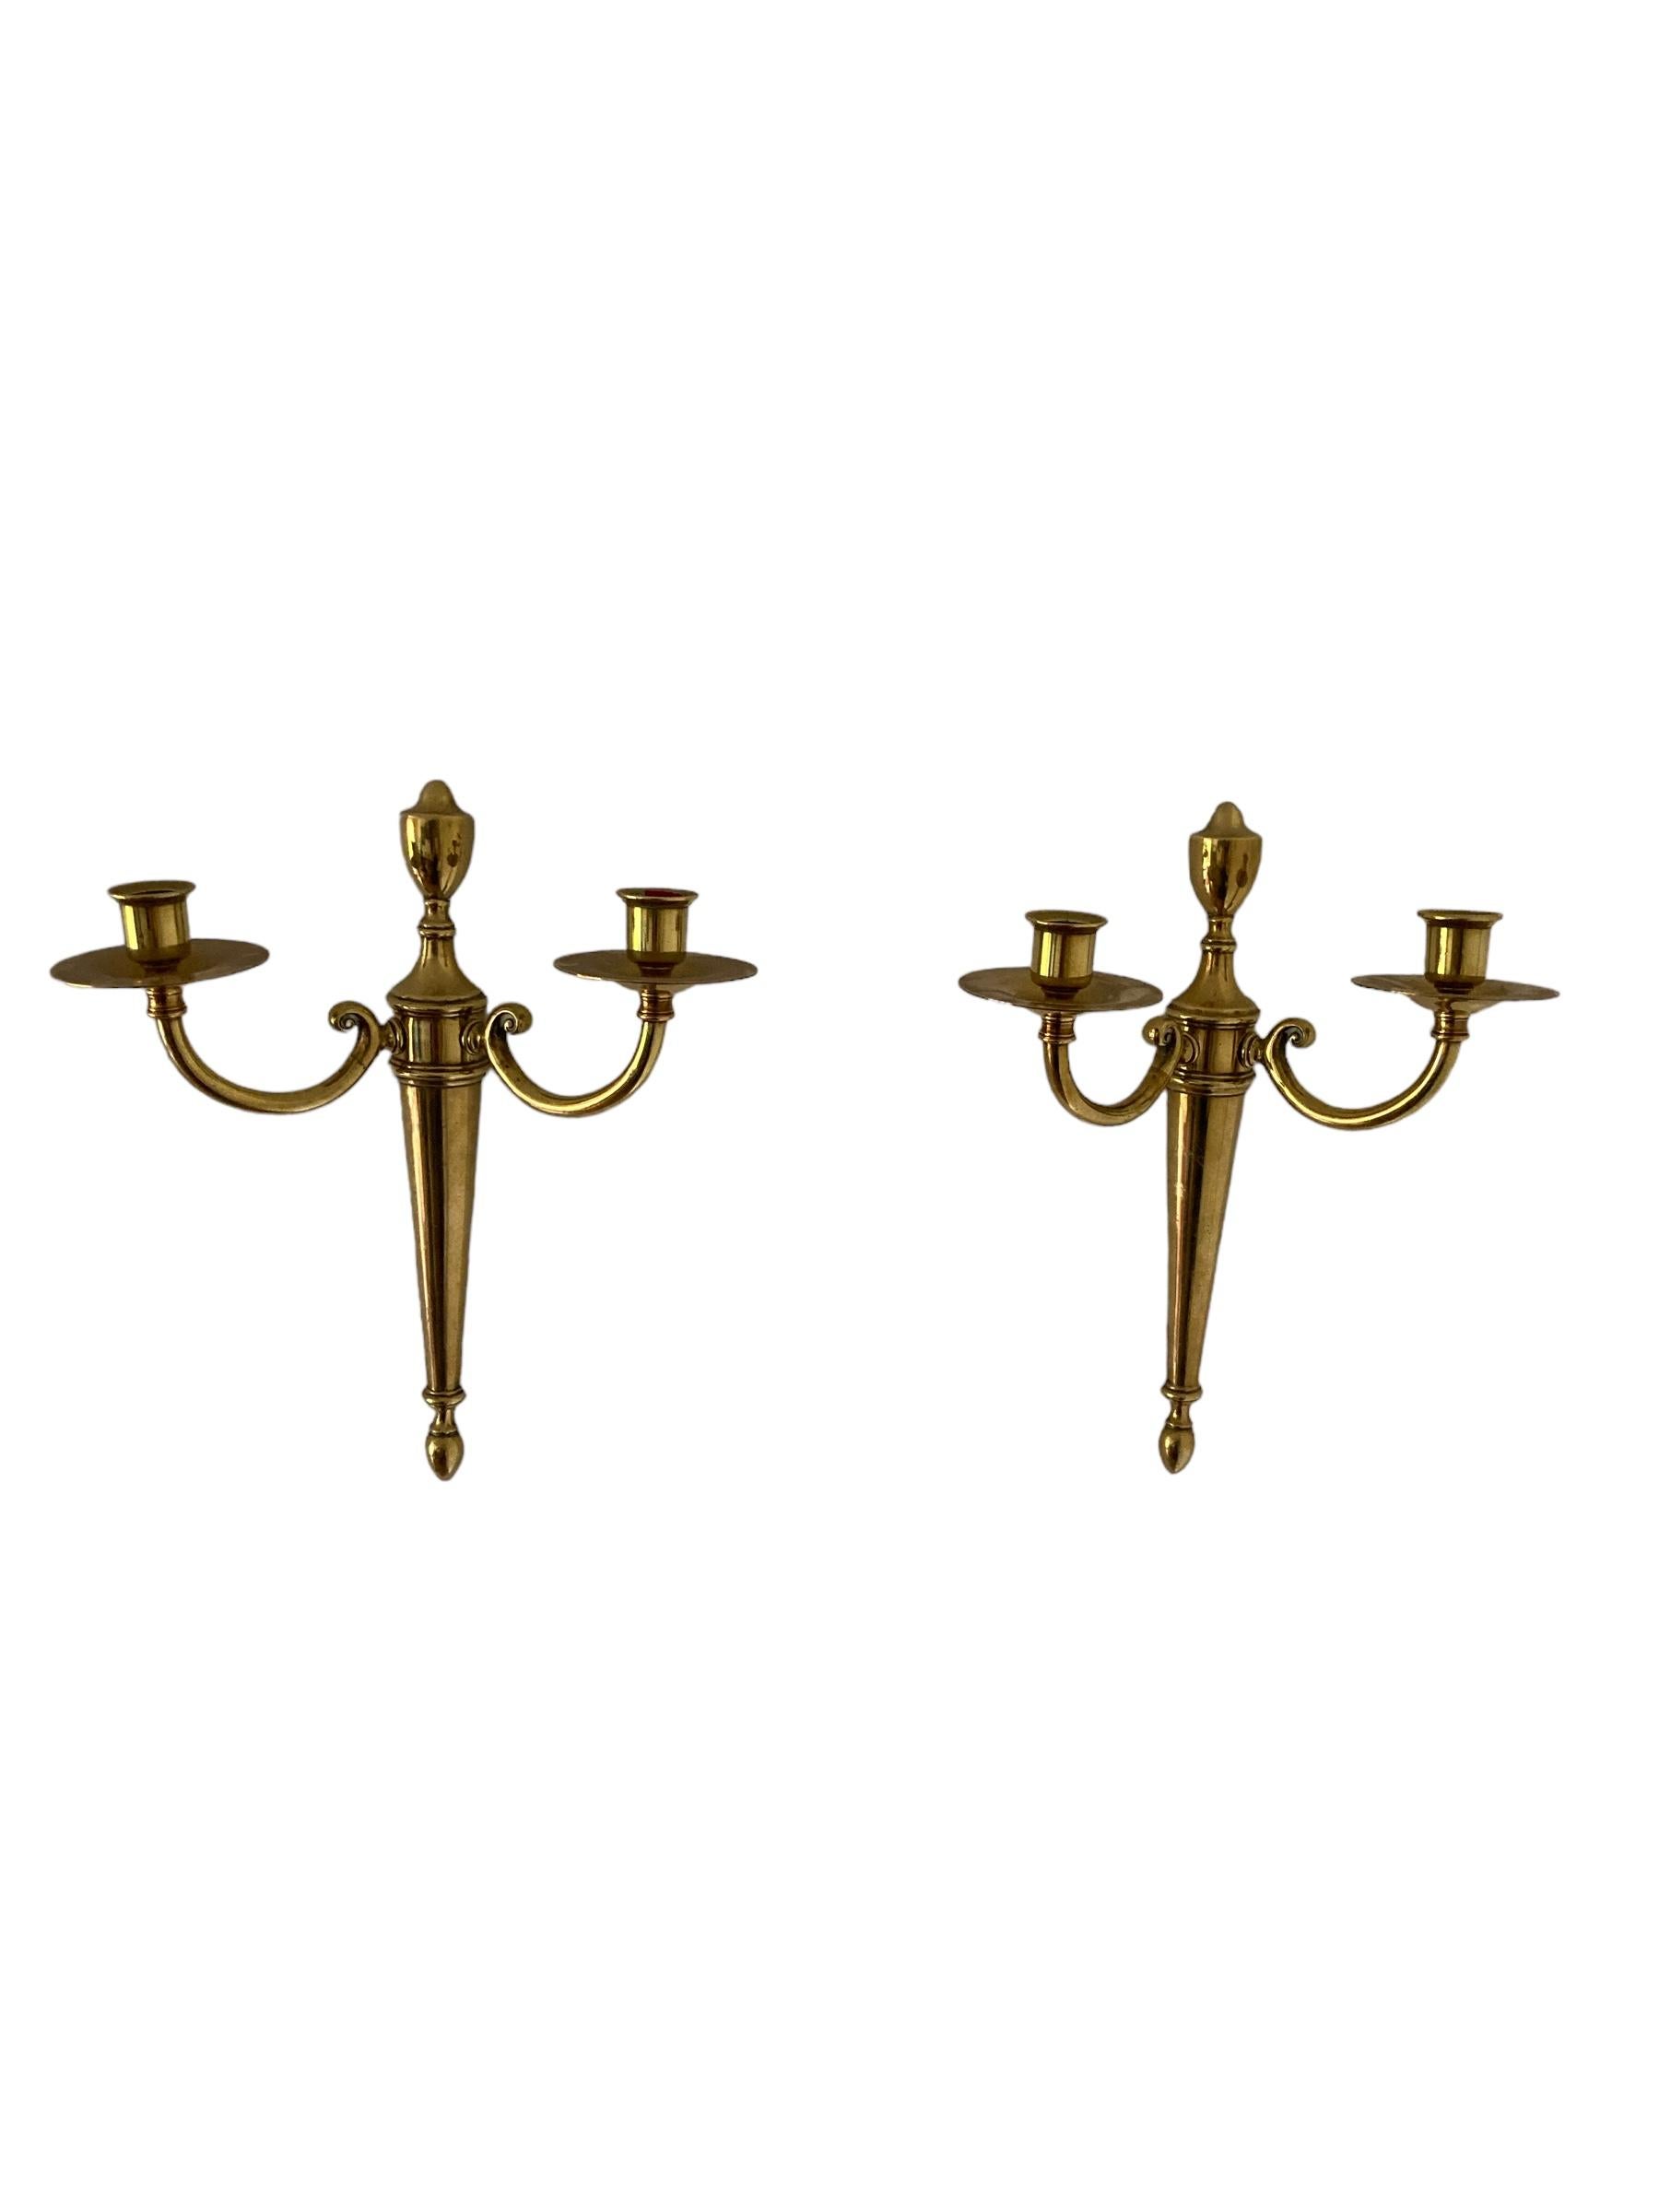 A Pair of Vintage Brass Candle Holder Wall Sconces In Good Condition For Sale In Bishop's Stortford, GB